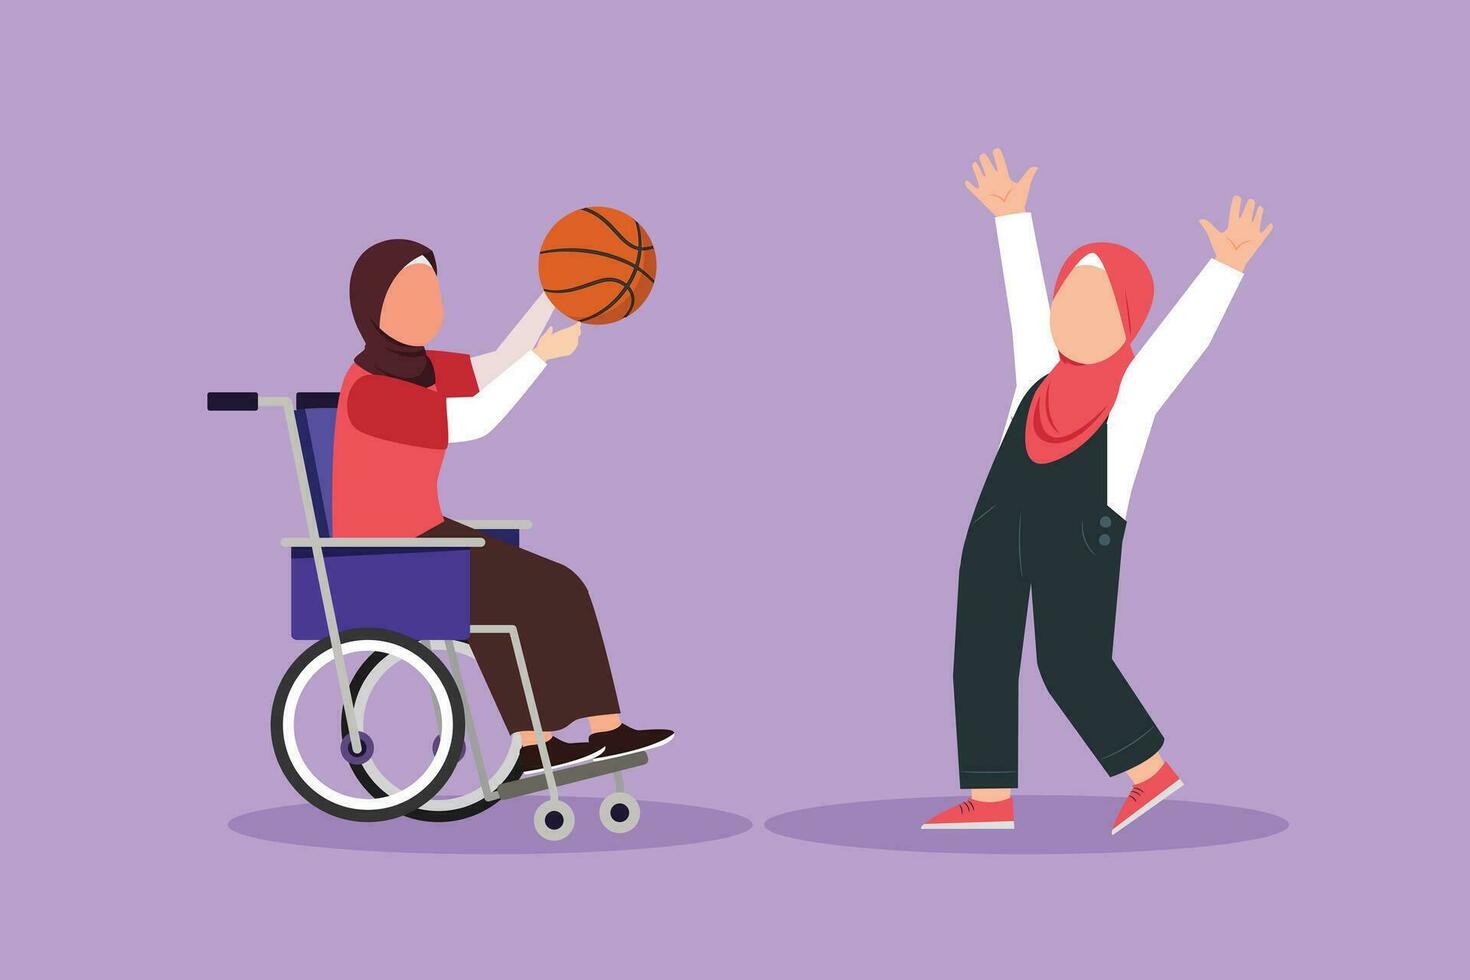 Graphic flat design drawing happy disabled people playing basketball. Little Arab girl in wheelchair playing ball with female friend outdoors living active lifestyle. Cartoon style vector illustration